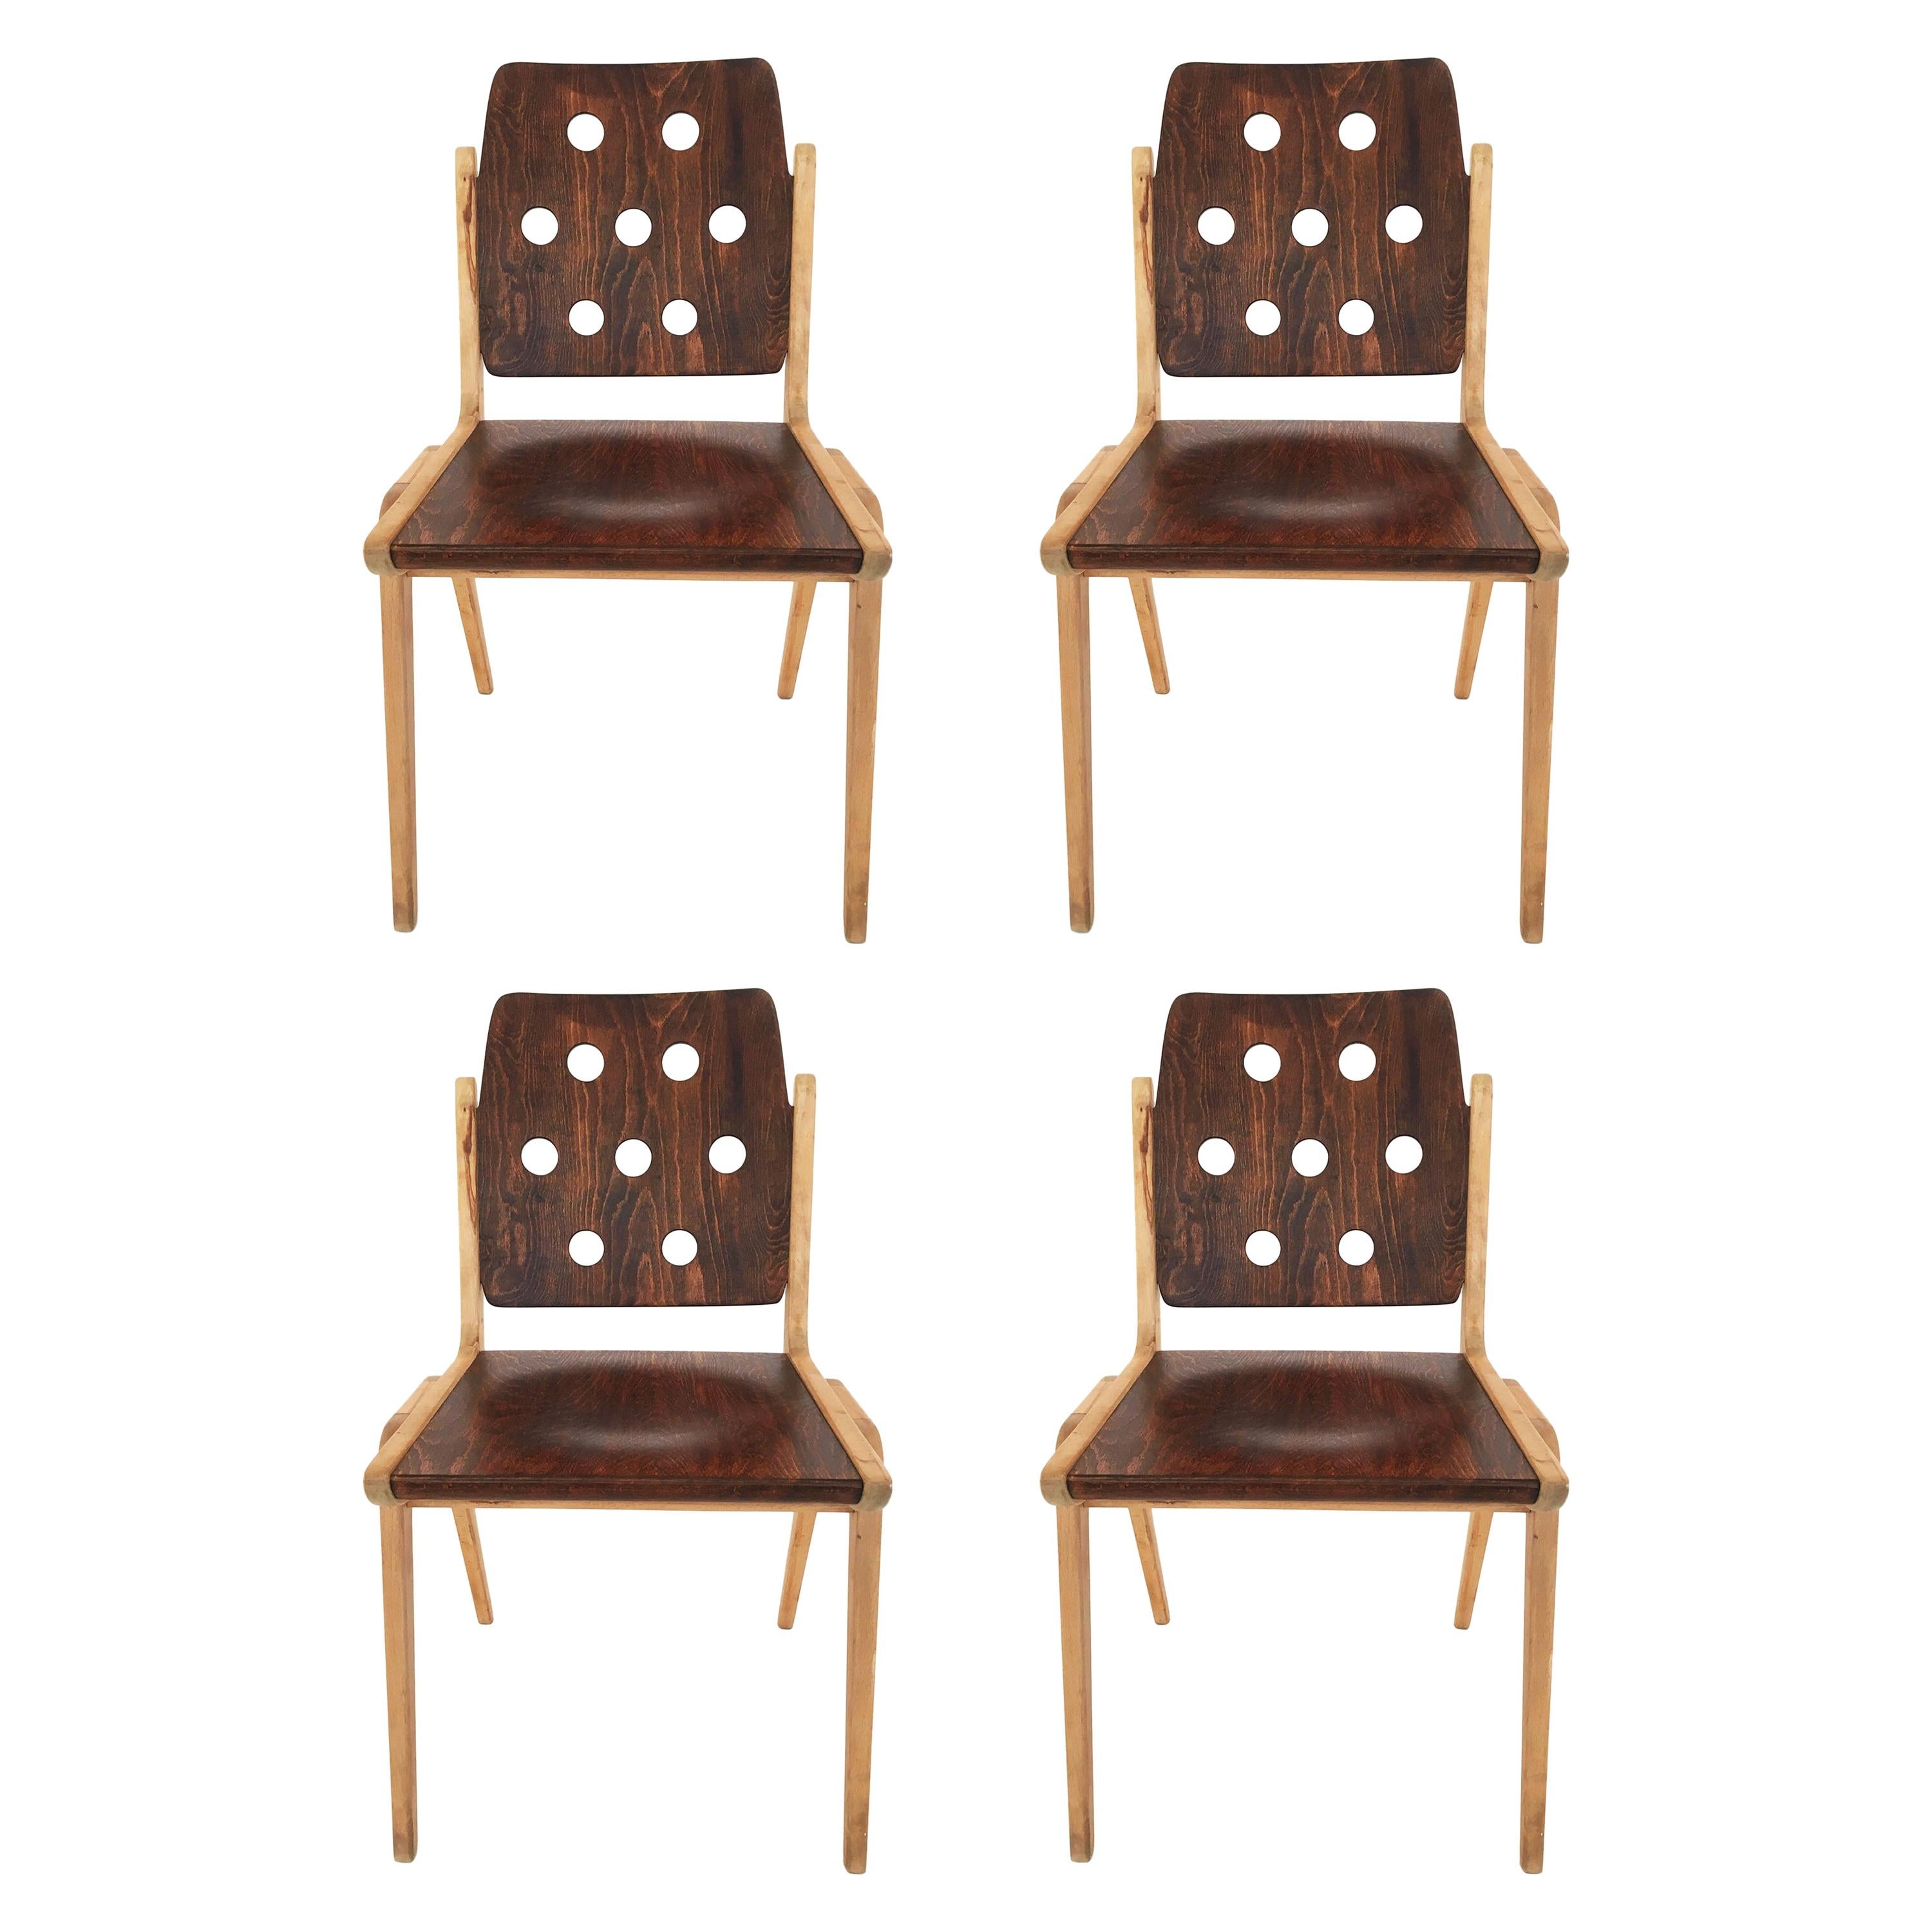 Franz Schuster Stacking Chairs Model 'Maestro', Set of Four, Austria 1950s